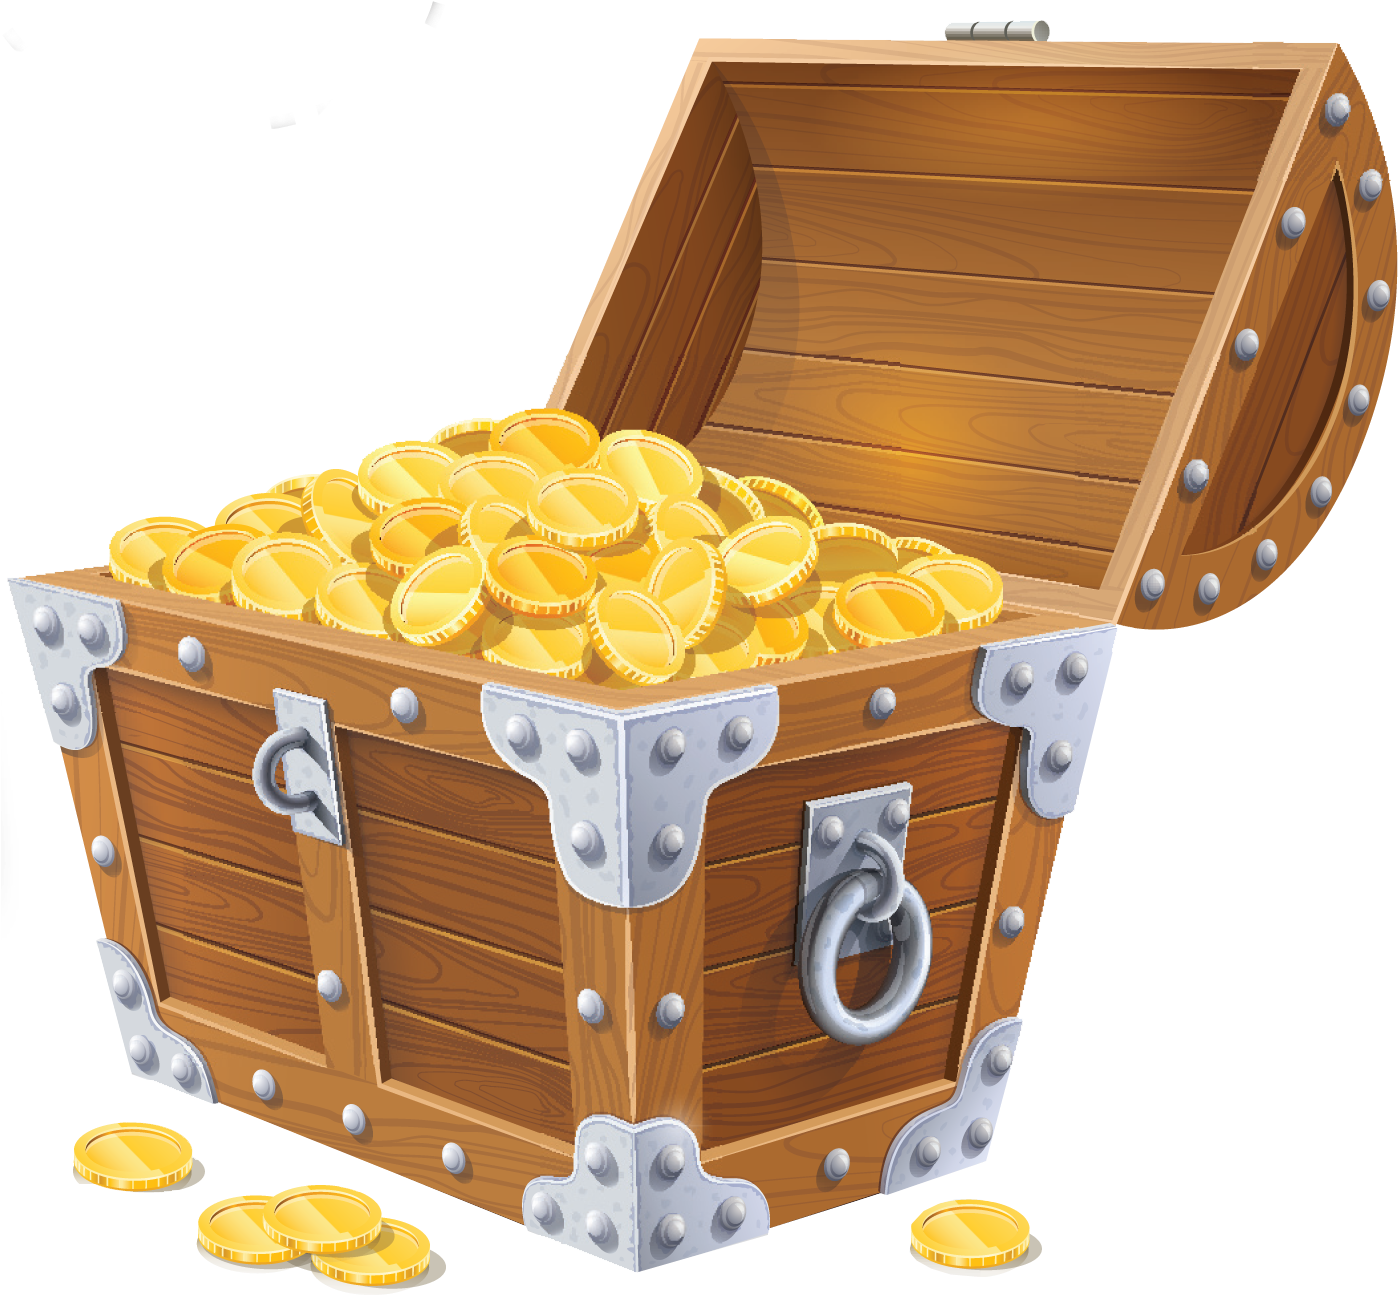 Open Treasure Chest Fullof Gold Coins.png PNG